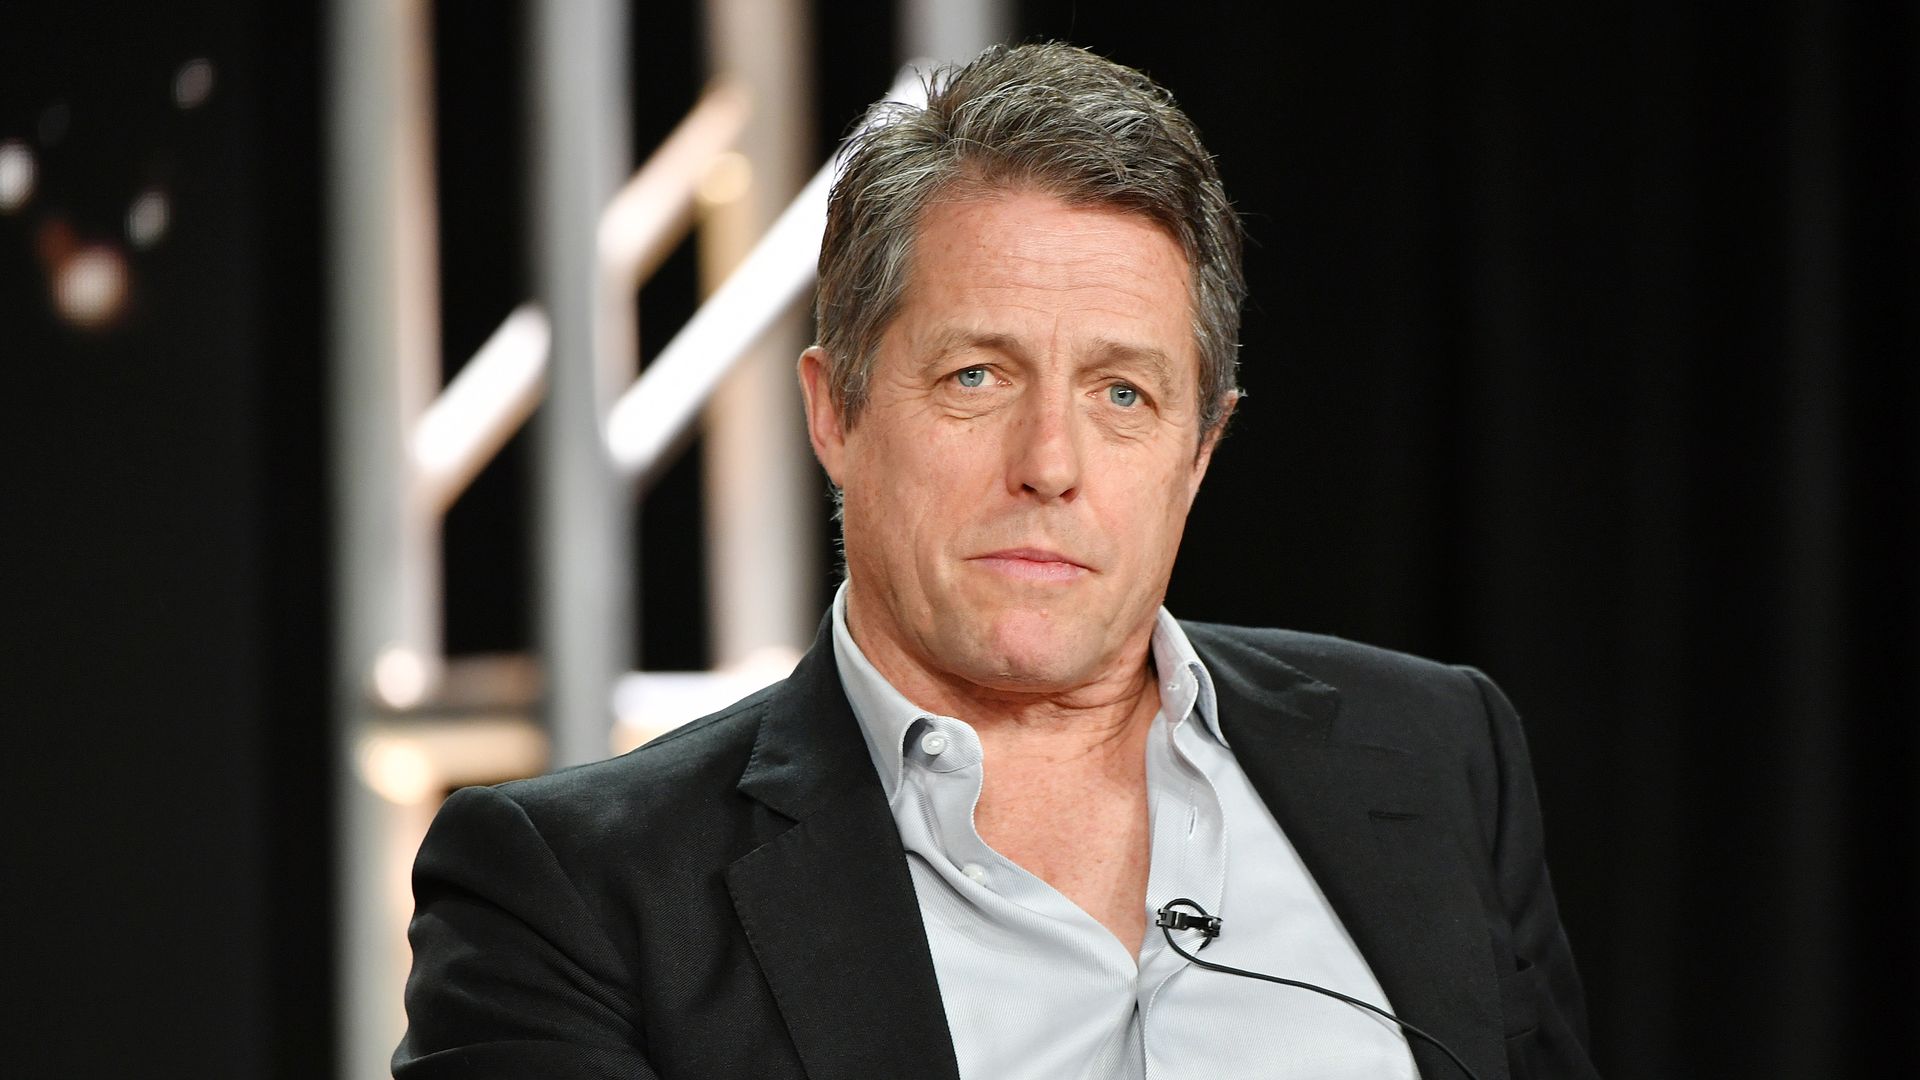 Hugh Grant's appearance as Oompa-Loompa in Willy Wonka movie gets called  out by fellow actor – see why